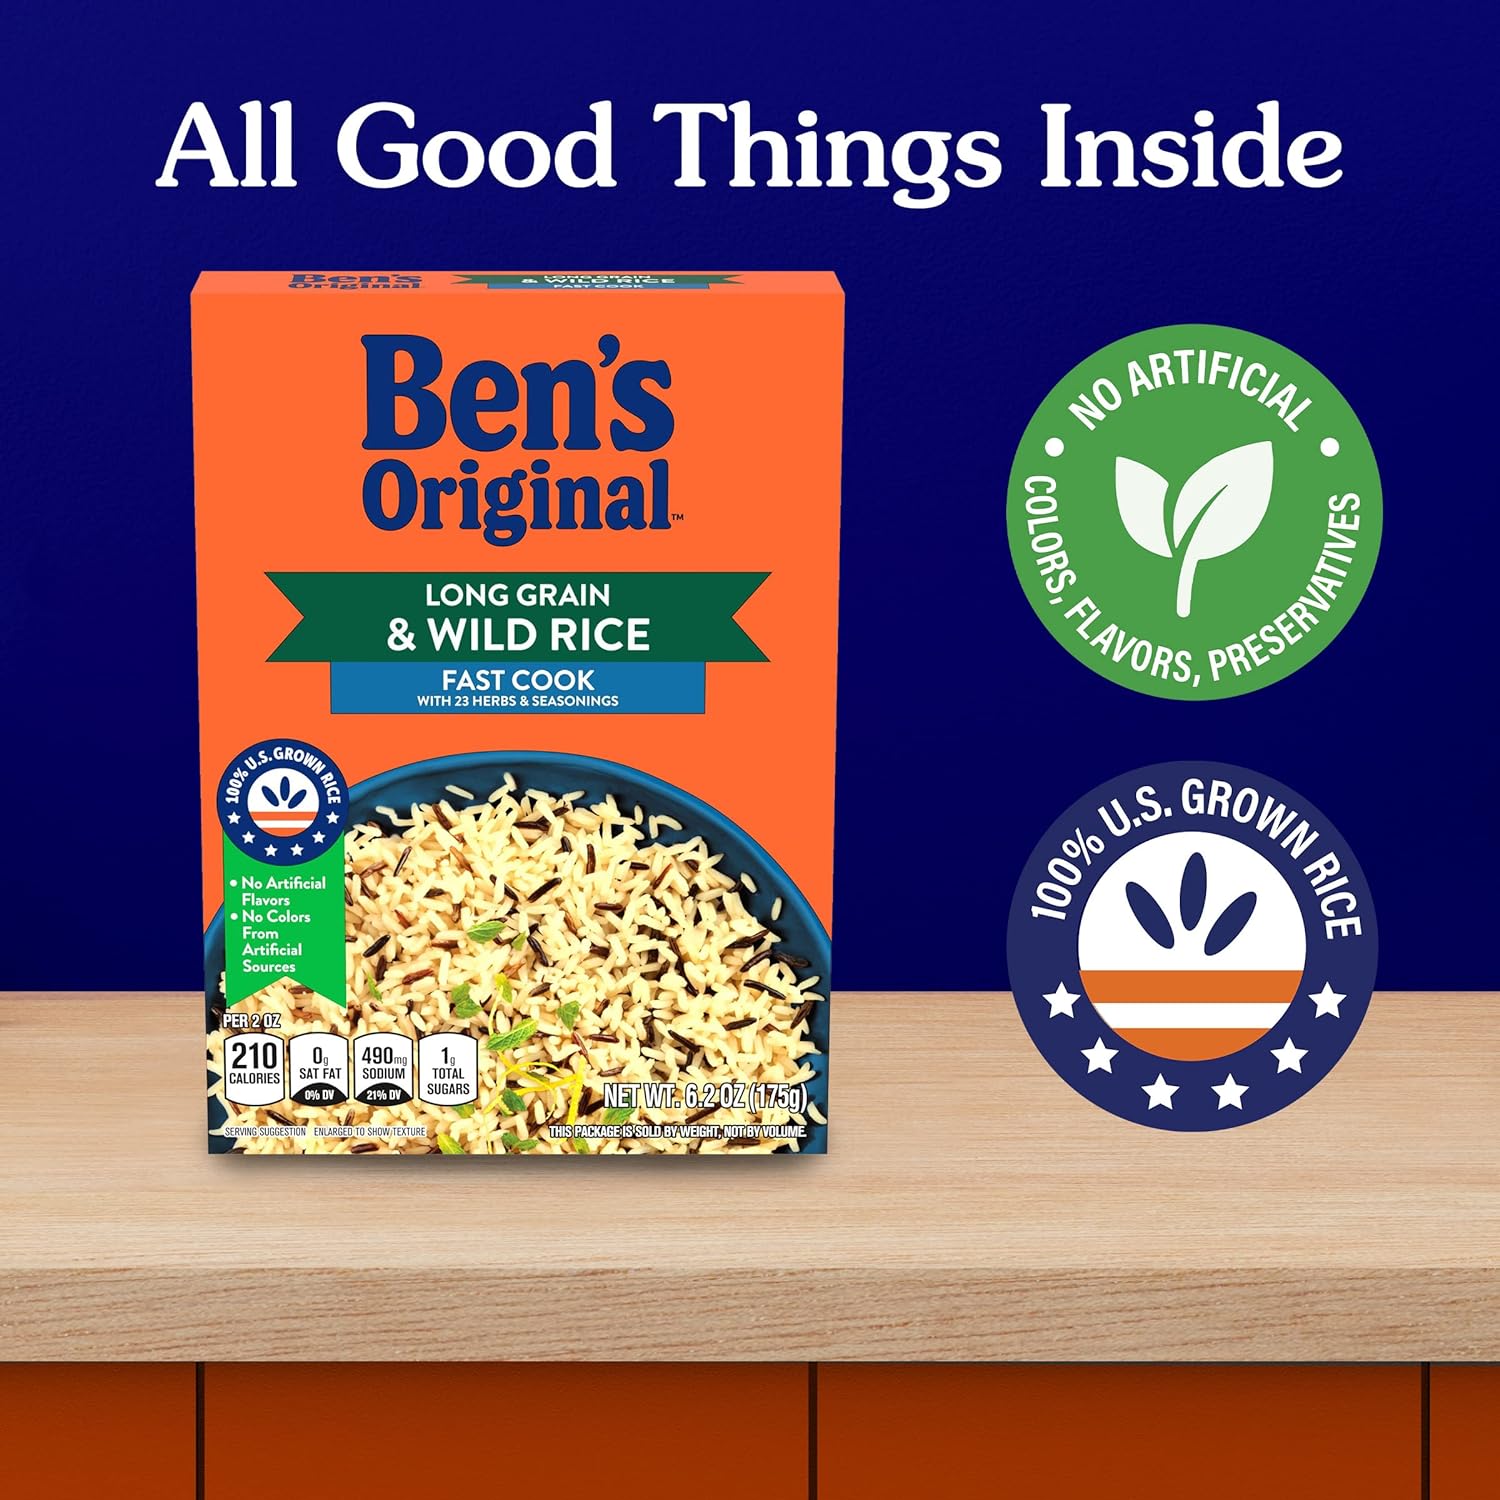 BEN'S ORIGINAL Long Grain Rice and Wild Rice, Fast Cook Rice, 6.2 OZ Box (Pack of 12) : Grocery & Gourmet Food